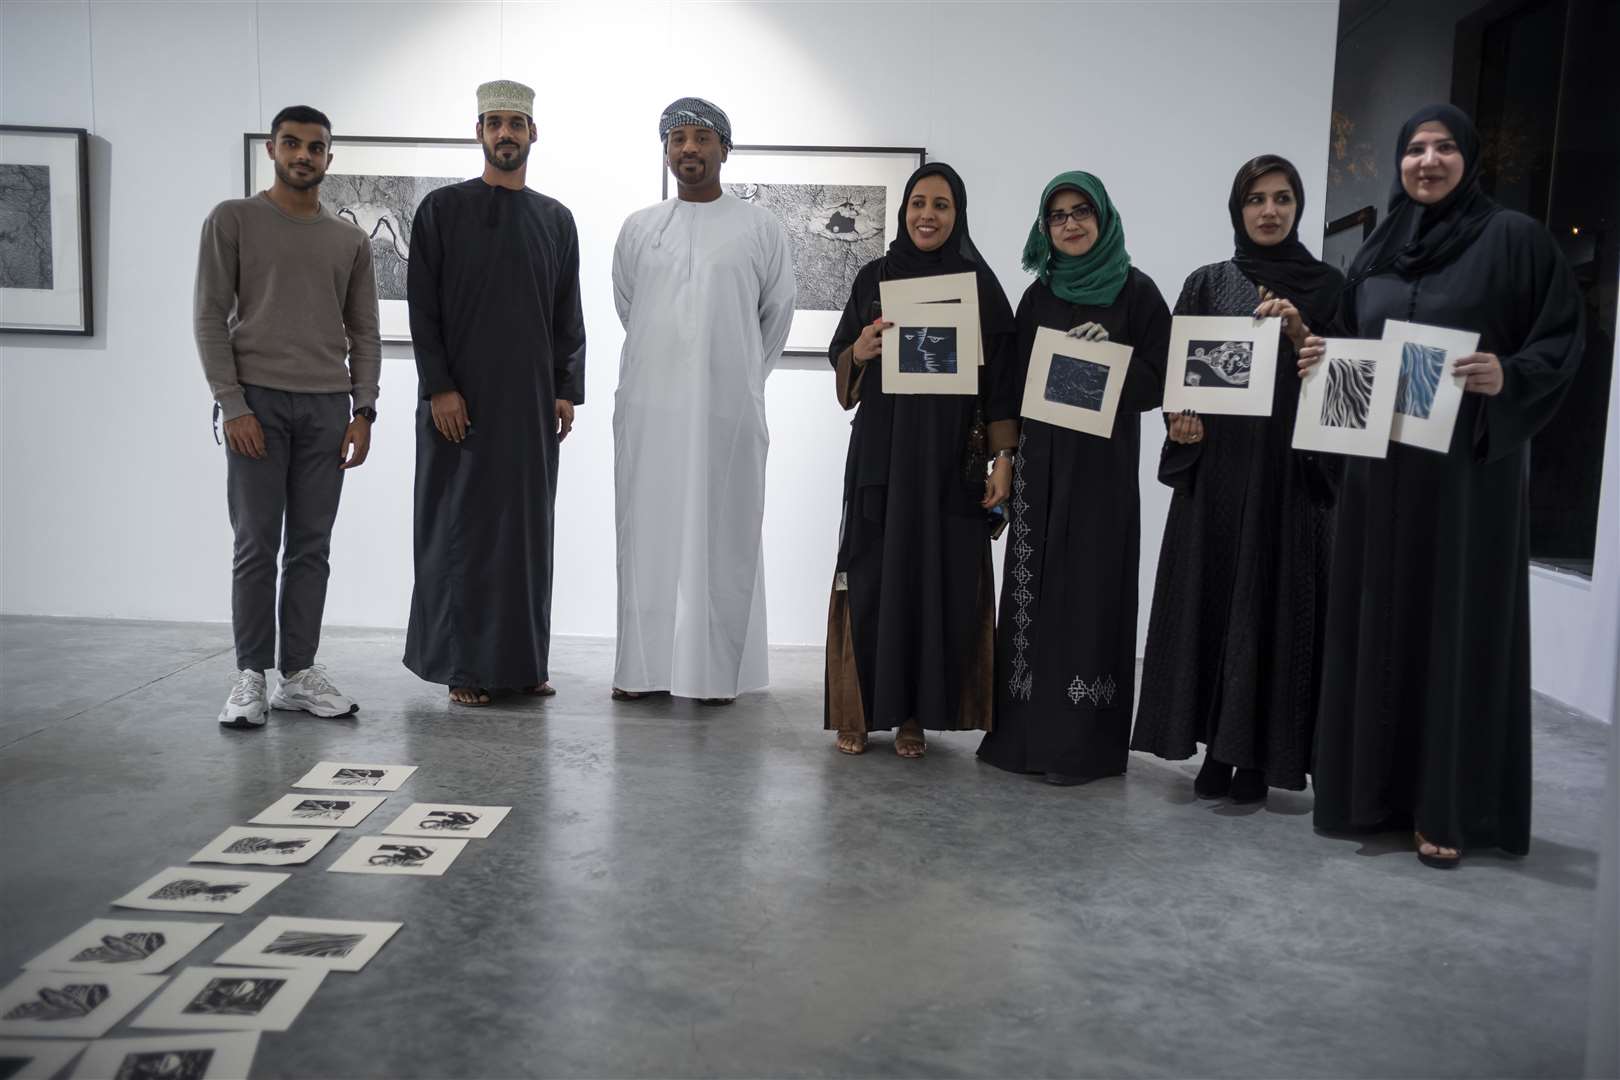 A print workshop was held in Oman facilitated by Highland Print Studios.